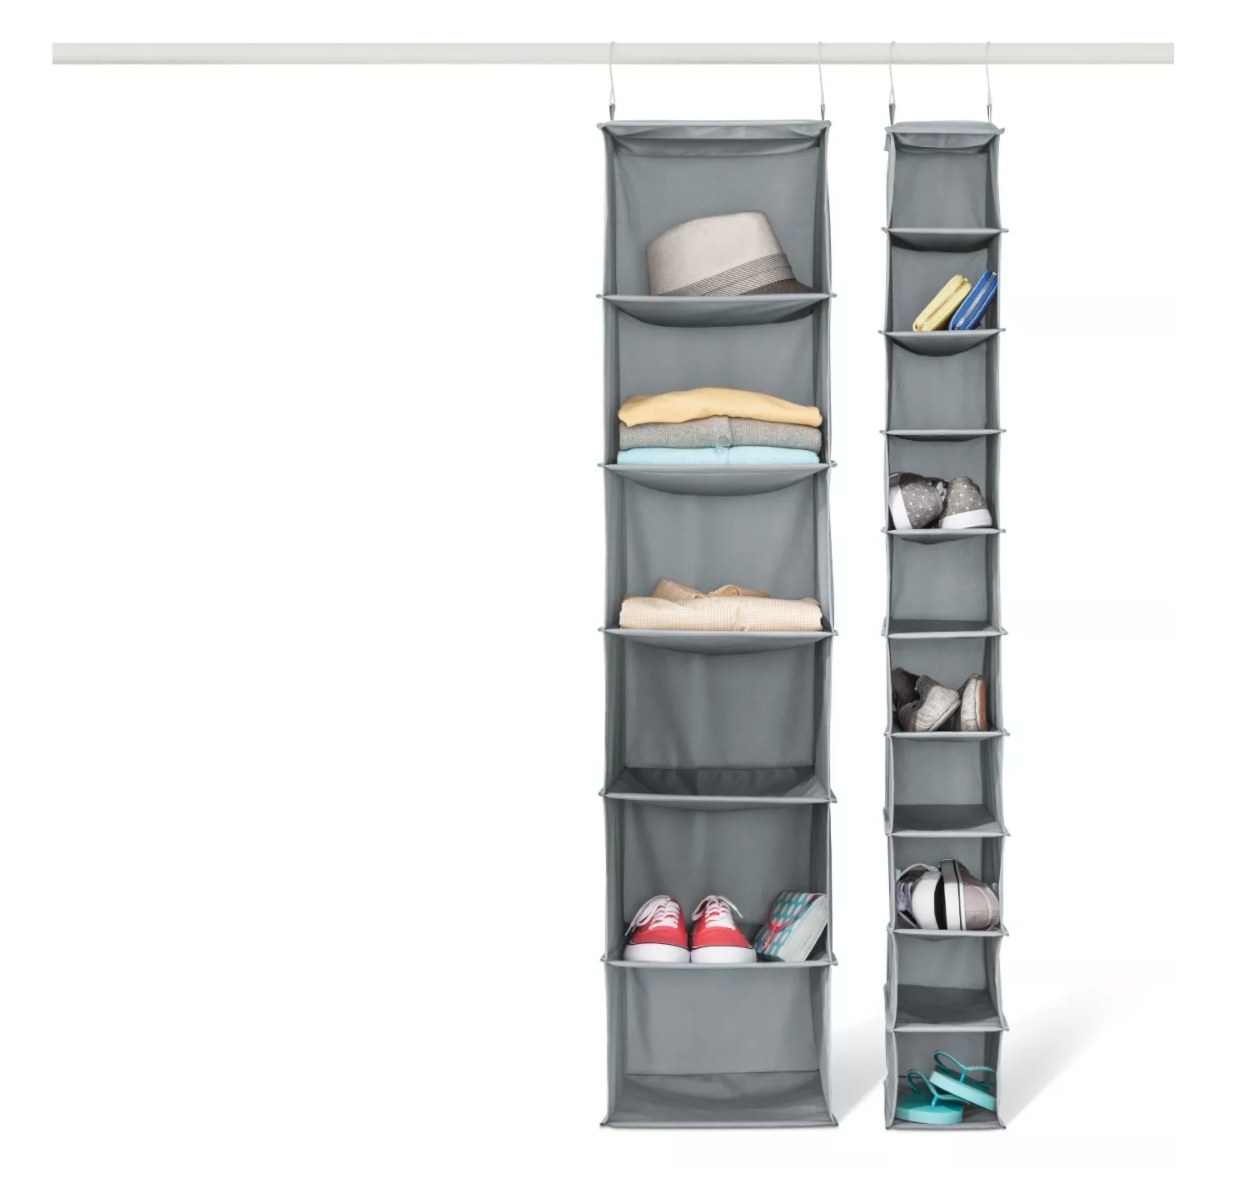 The shoe storage organizer holding folded sweaters and sneakers